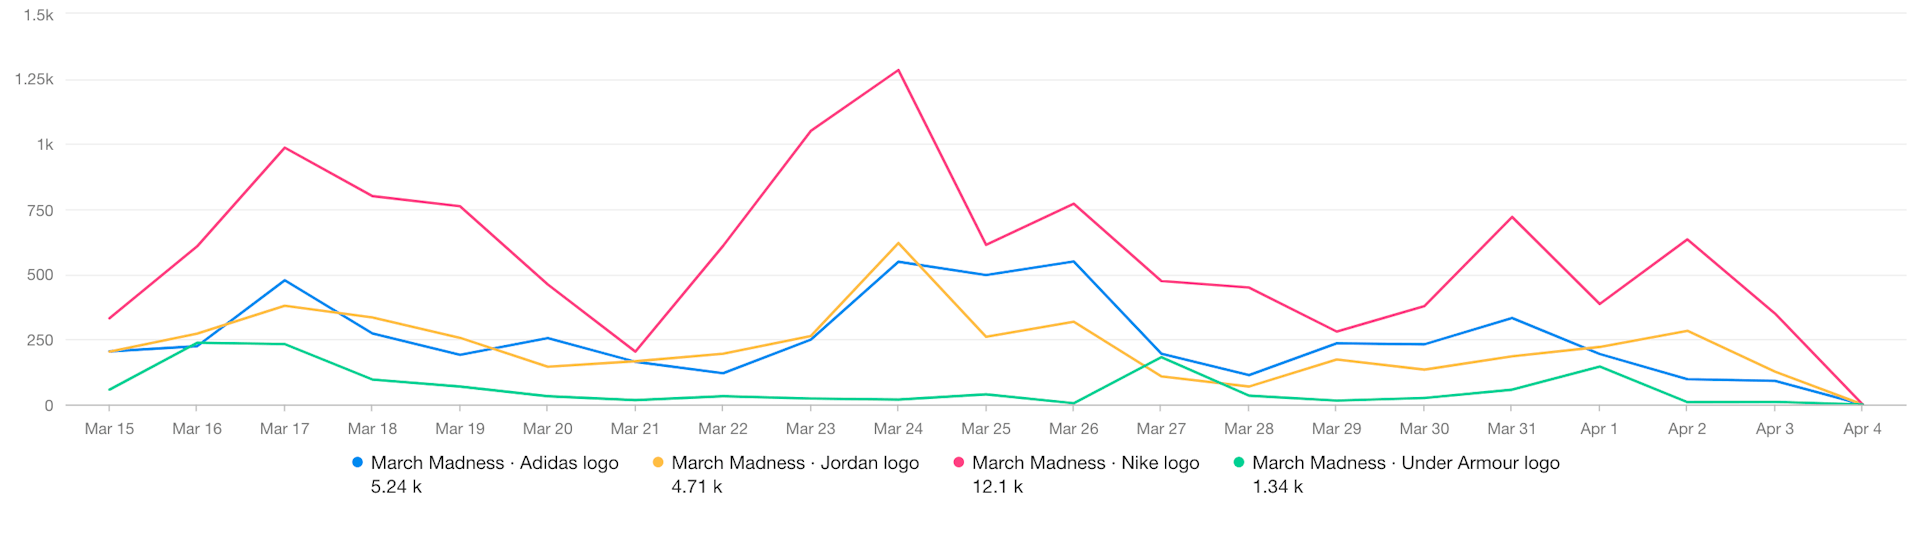 A line graph comparing the number of photos including the Adidas, Jordan, Nike, and Under Armour logos from March 15 through April 4. The Nike line has the highest value throughout.